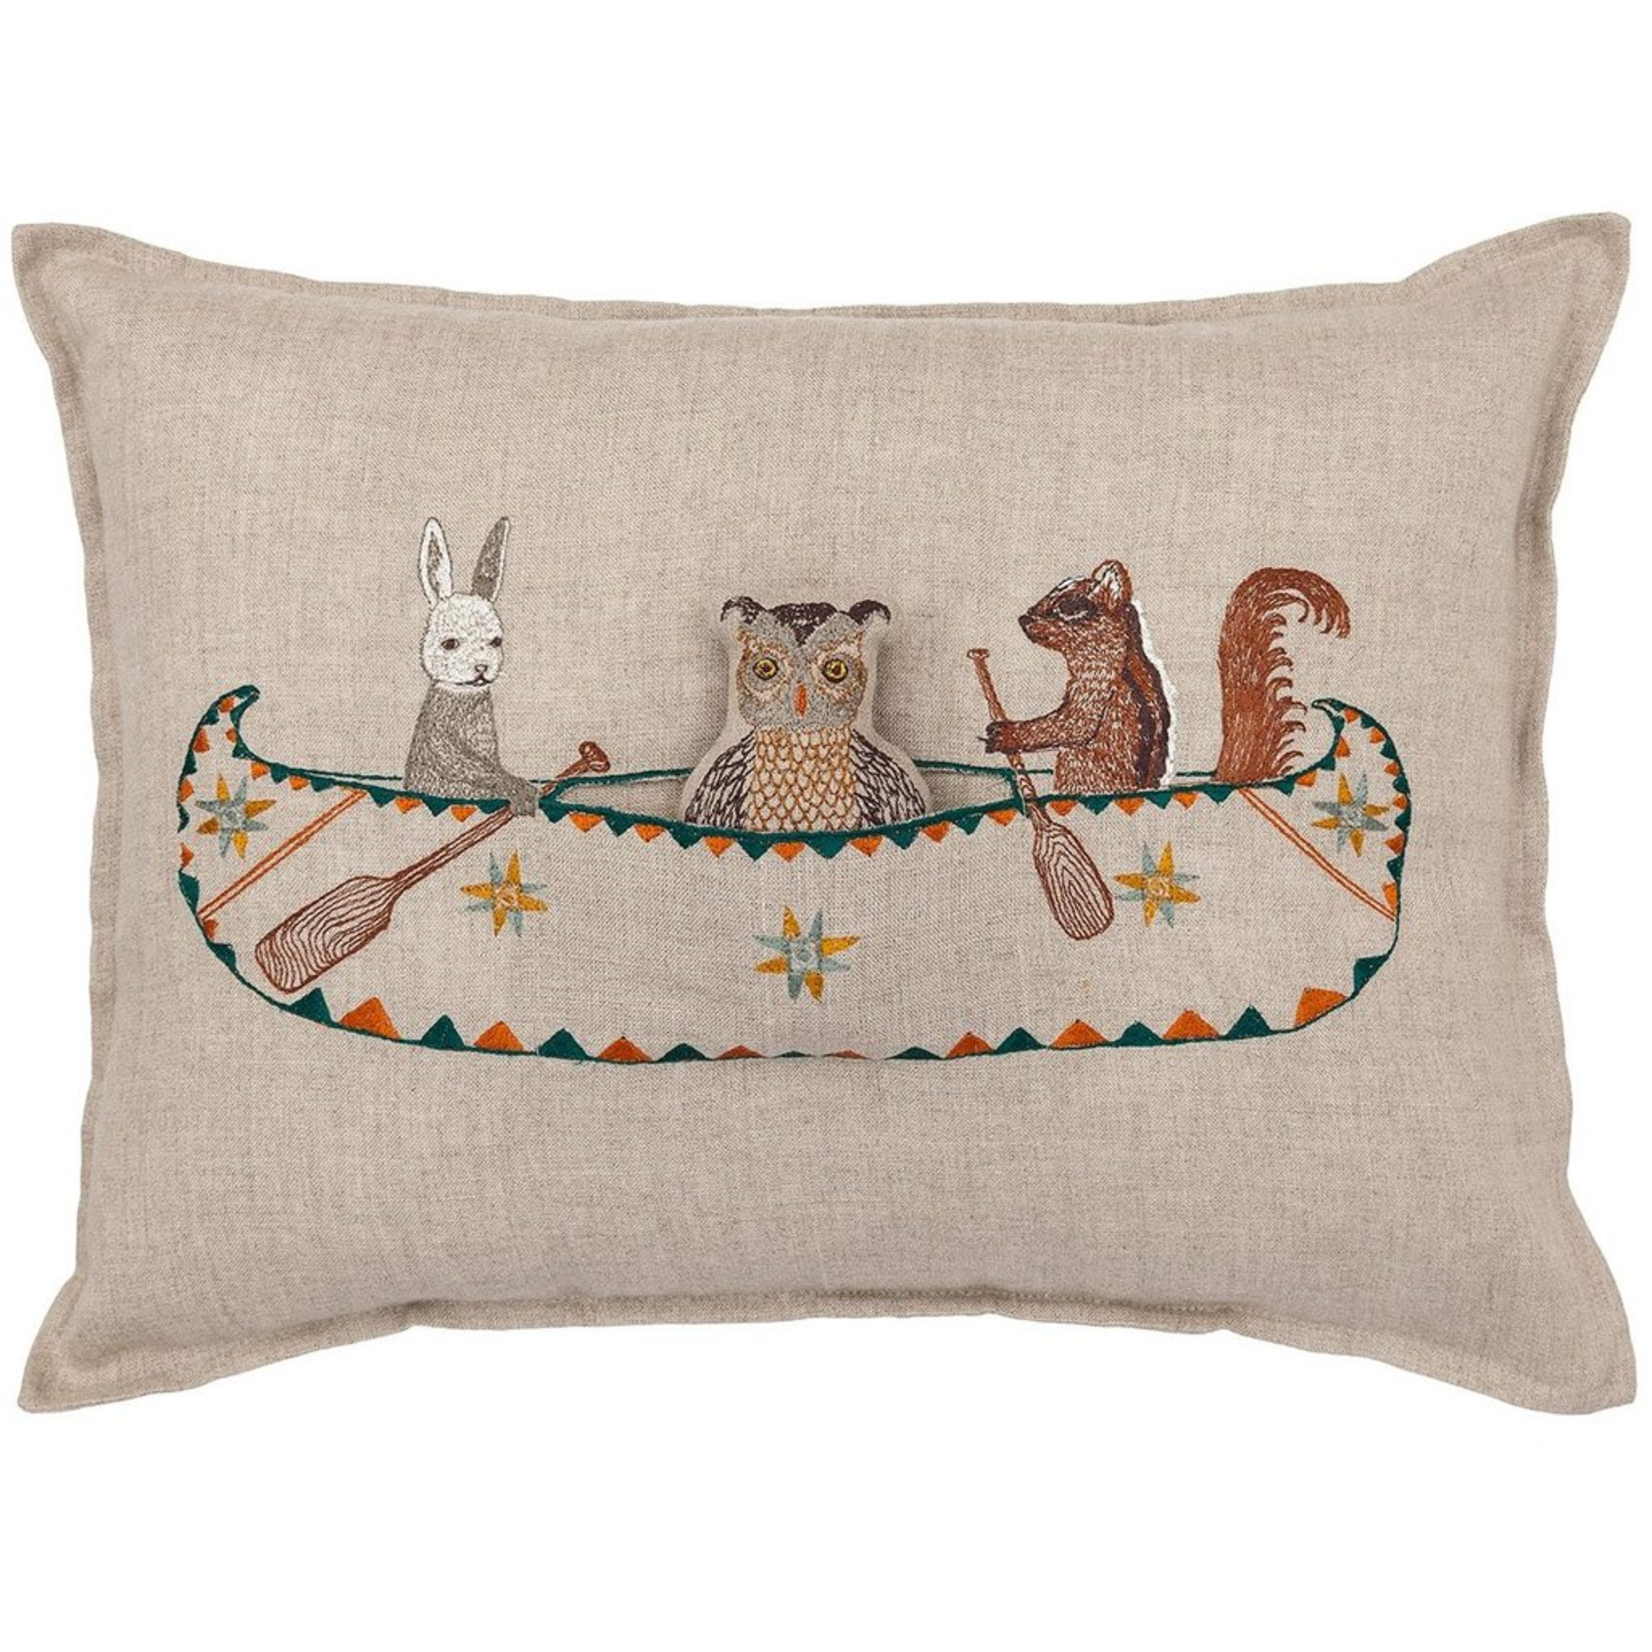 Pillows - Embroidered Friends Canoe Pocket Pillow